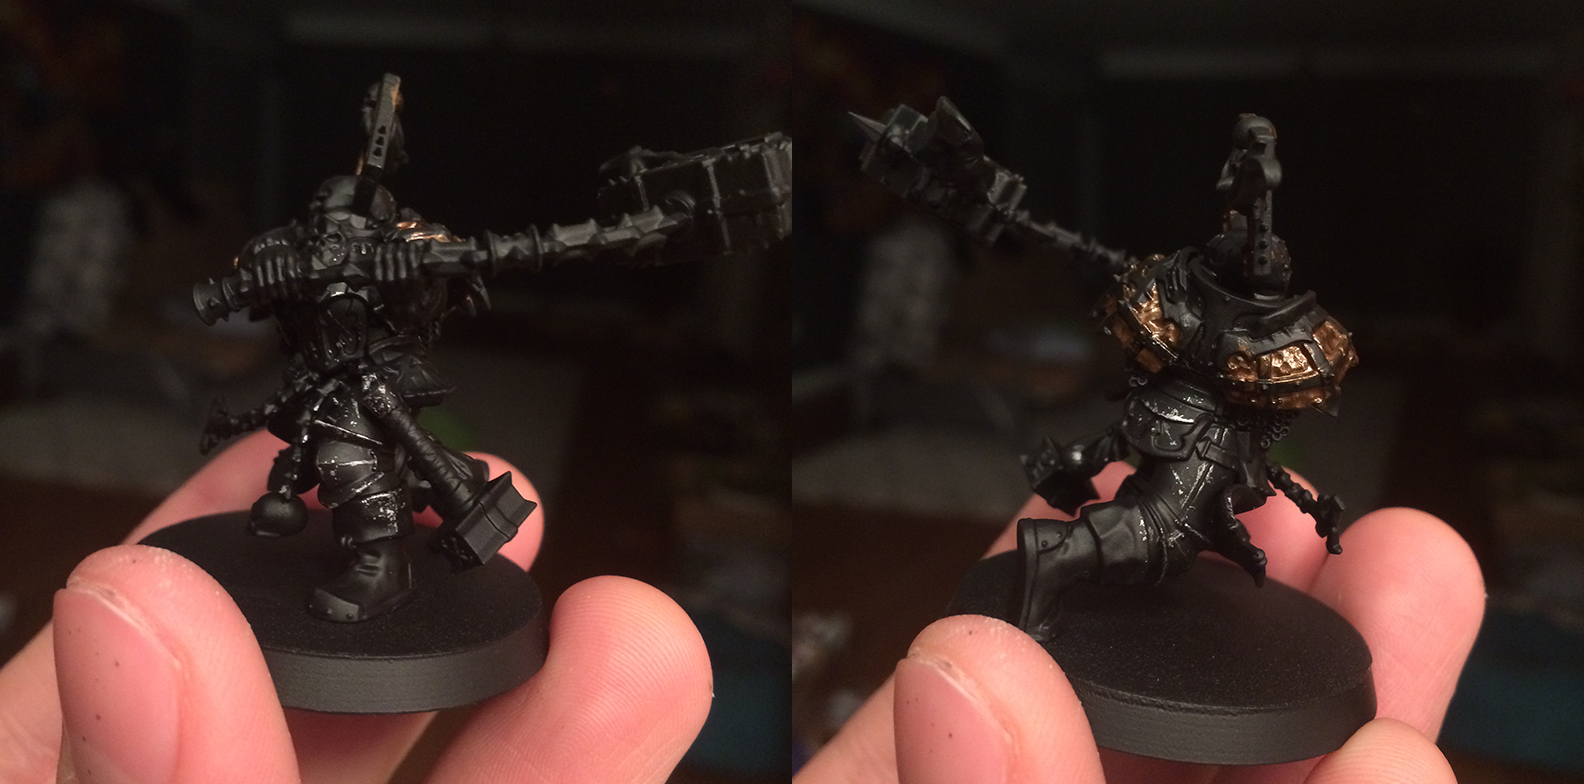 The Nuln Oil Warrior Appears: Conversion Corner